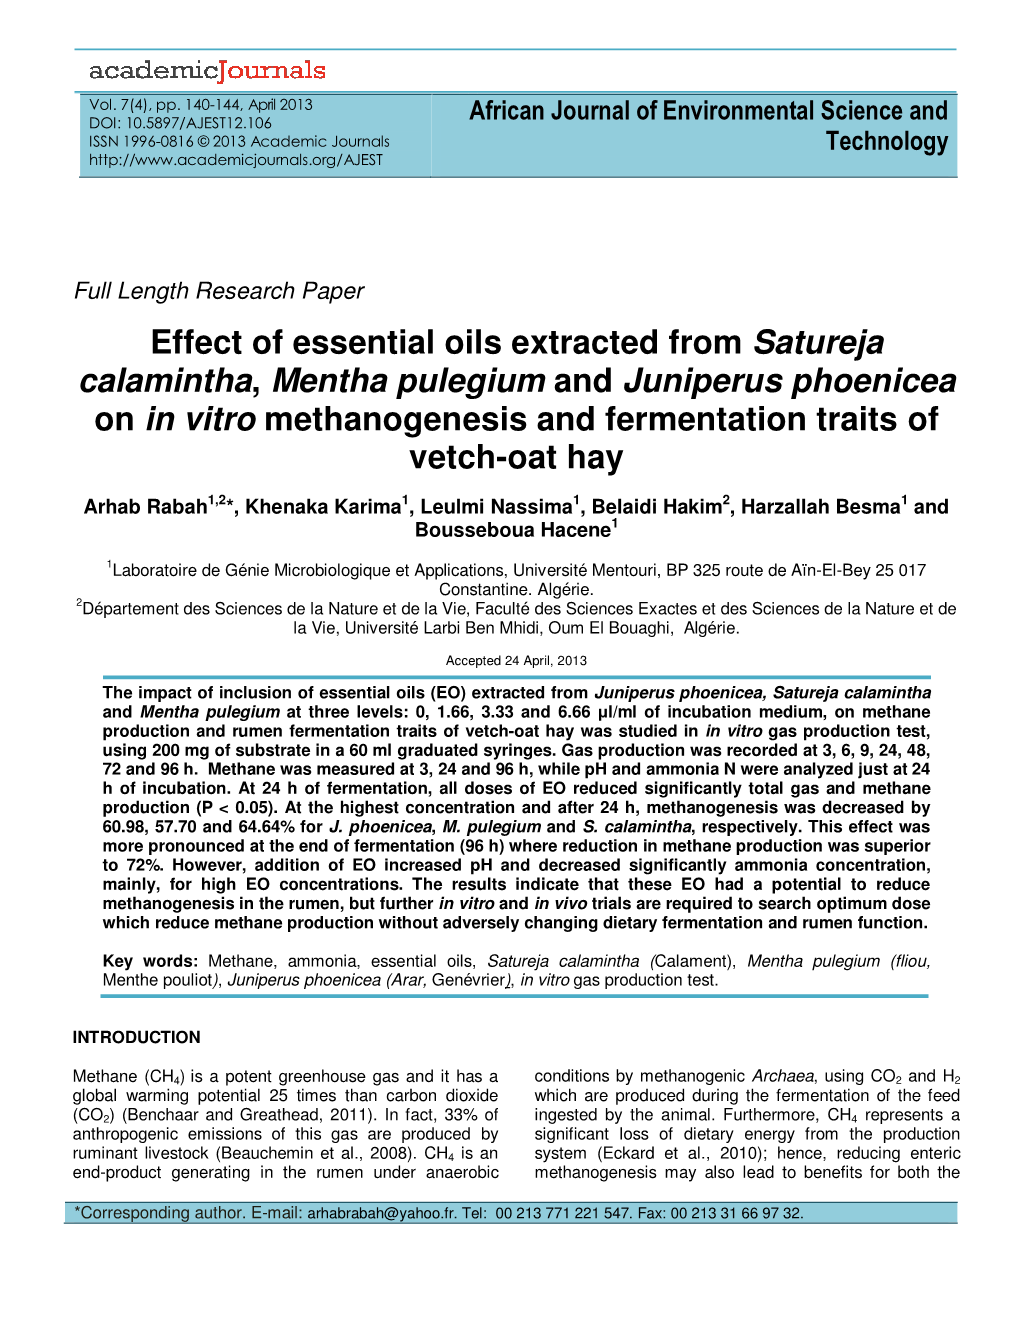 Effect of Essential Oils Extracted from Satureja Calamintha, Mentha